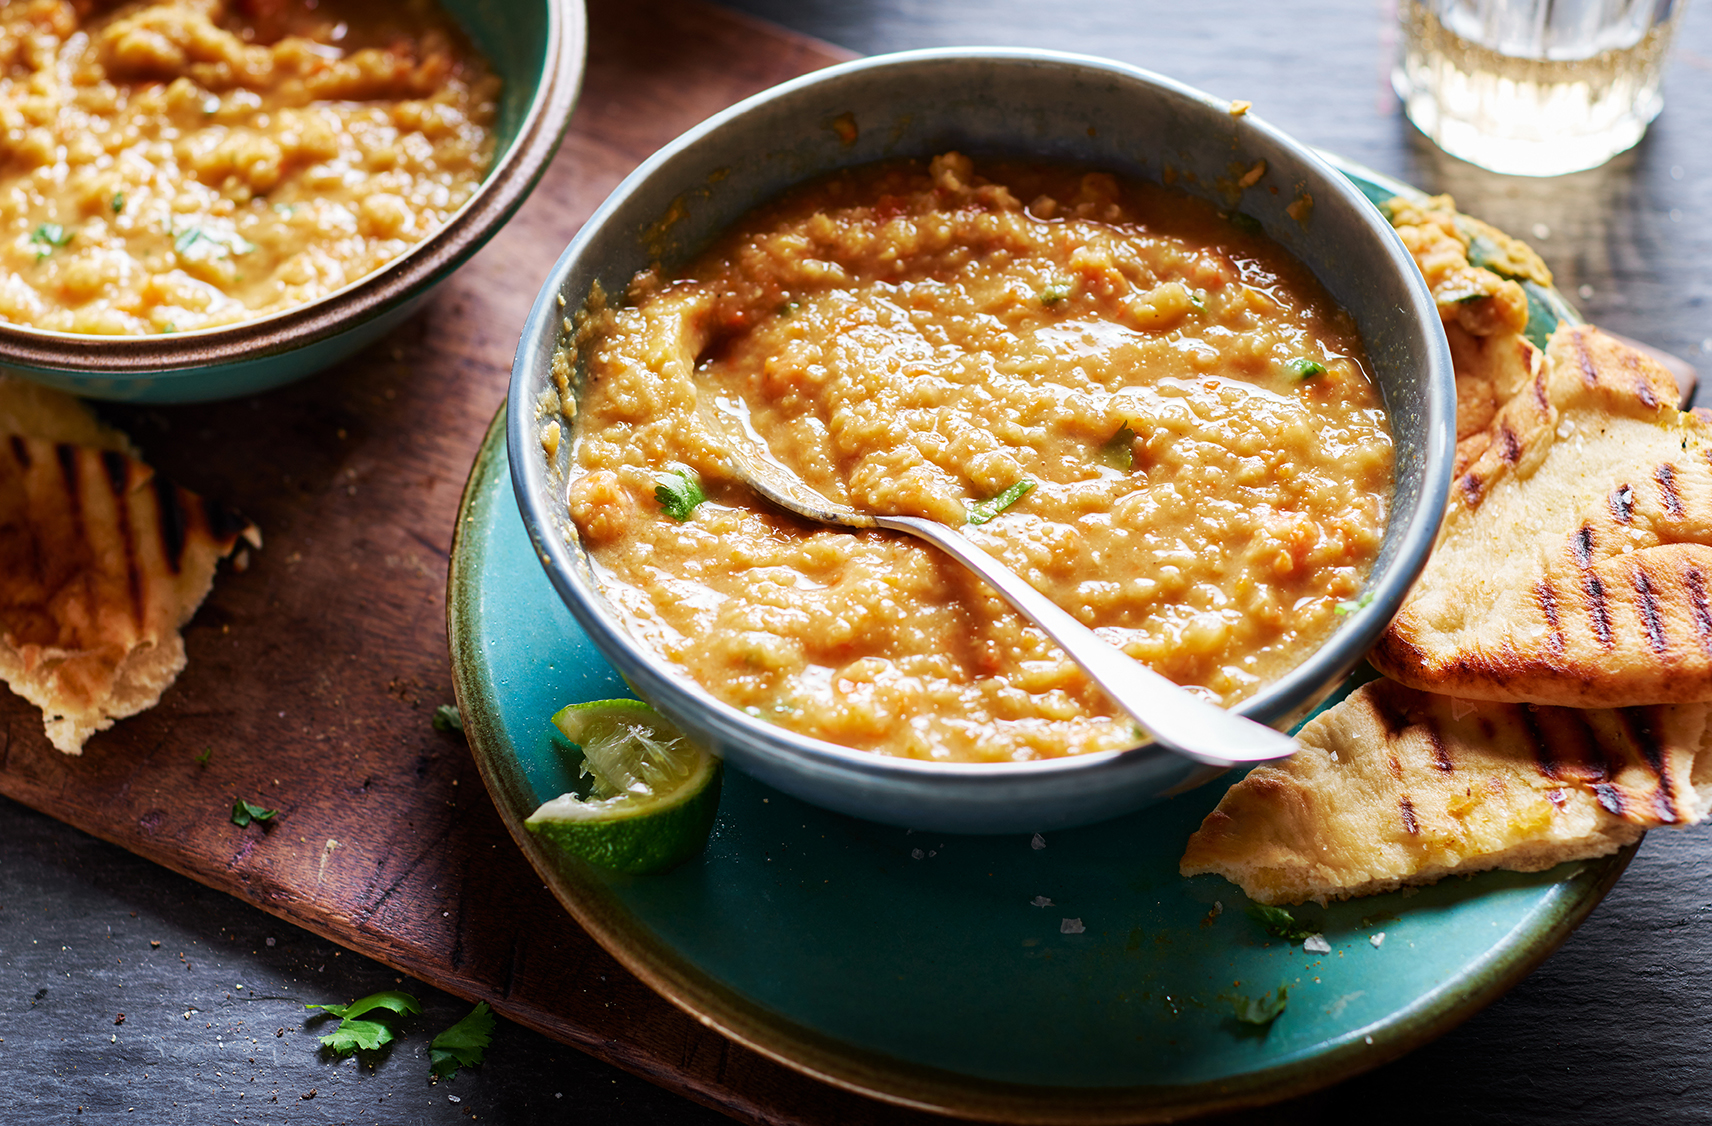 A bowl of creamy, yet textured, orange lentil soup garnished with coriander leaves